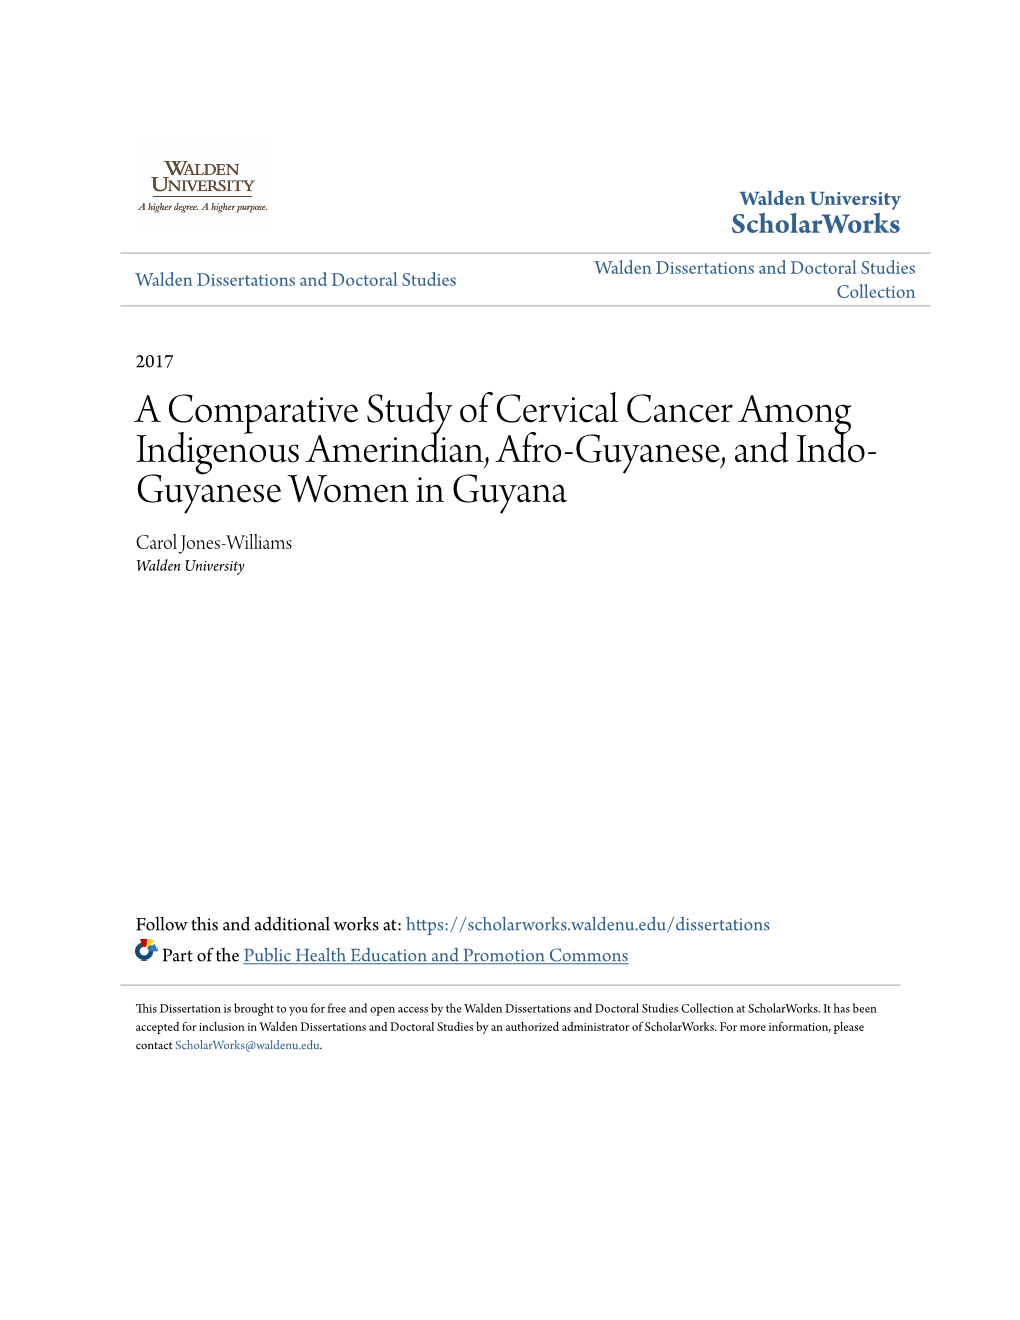 A Comparative Study of Cervical Cancer Among Indigenous Amerindian, Afro-Guyanese, and Indo-Guyanese Women in Guyana